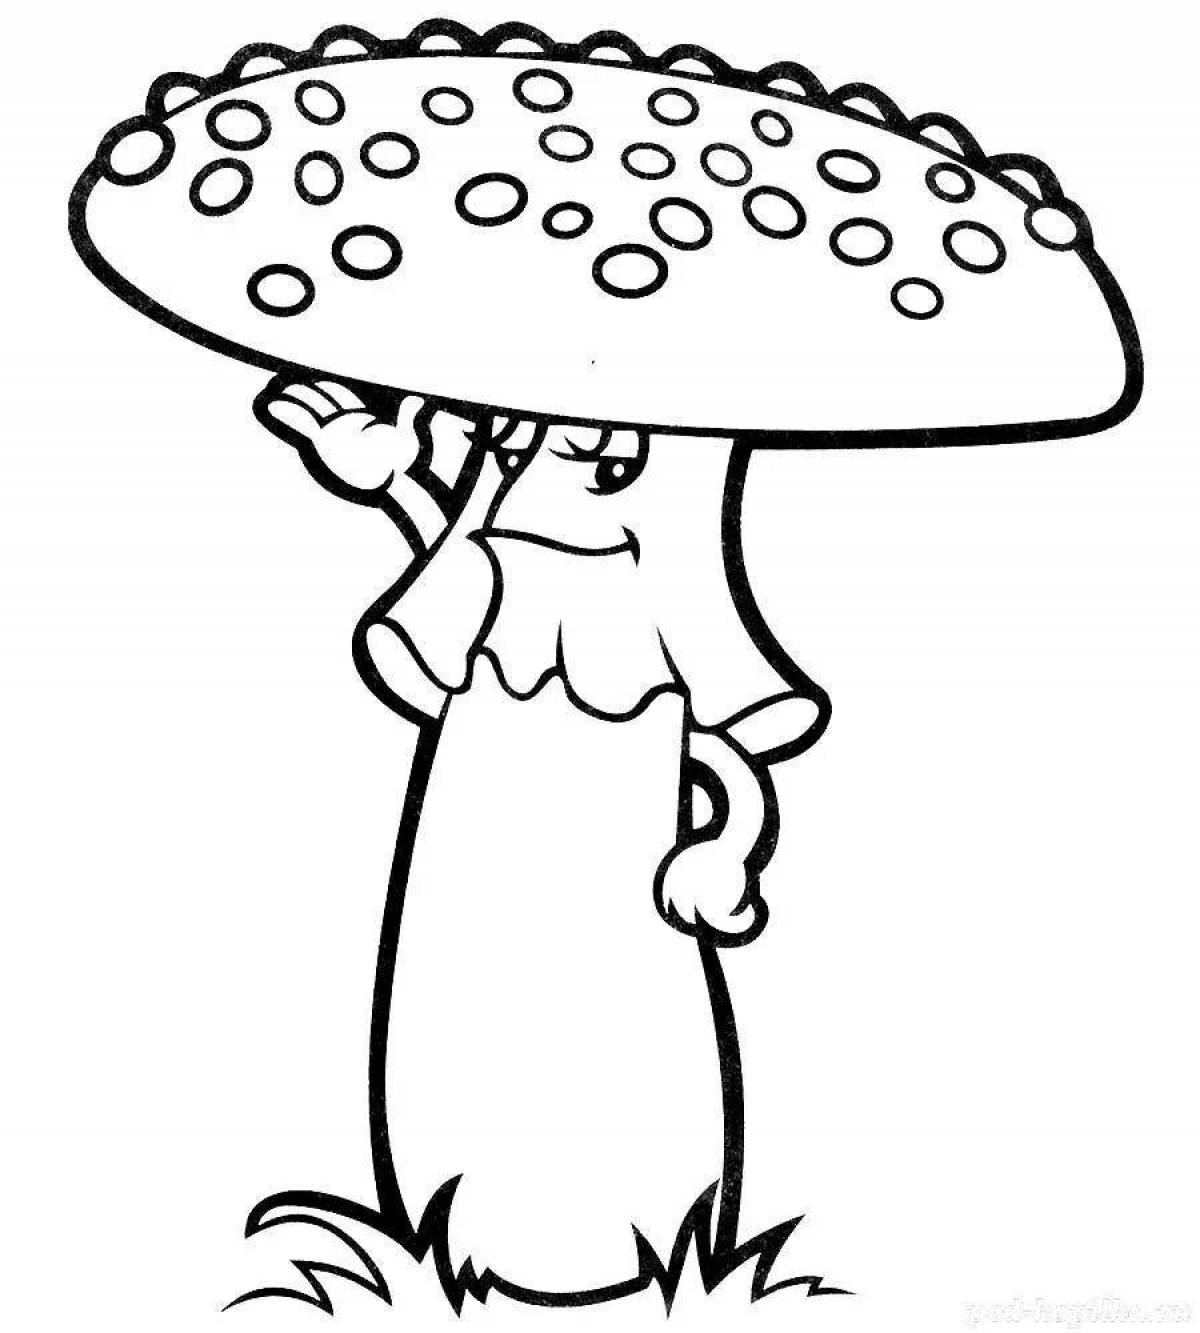 Delightful fly agaric drawing for preschoolers